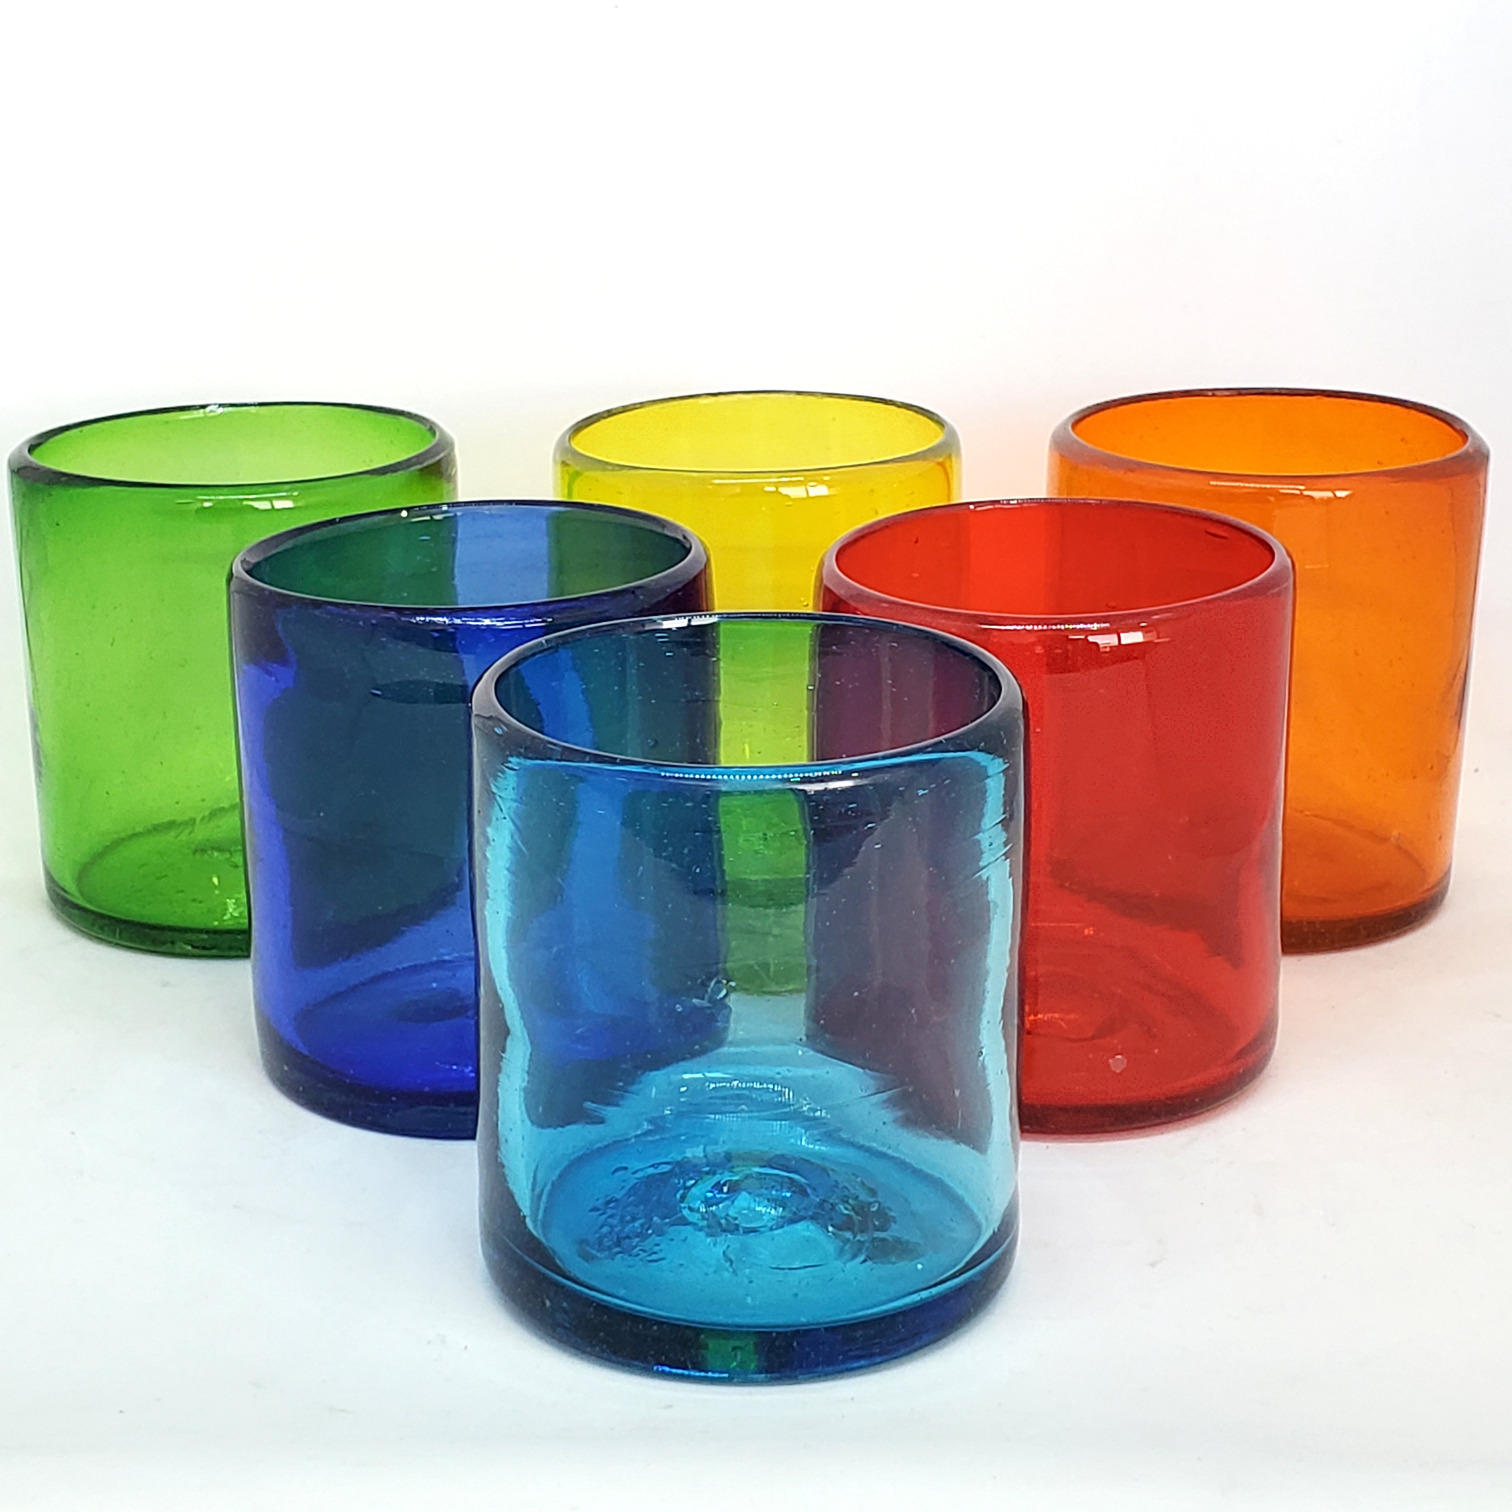 Colored Glassware / Rainbow Colored 9 oz Short Tumblers (set of 6) / Enhance your favorite drink with these colorful handcrafted glasses.